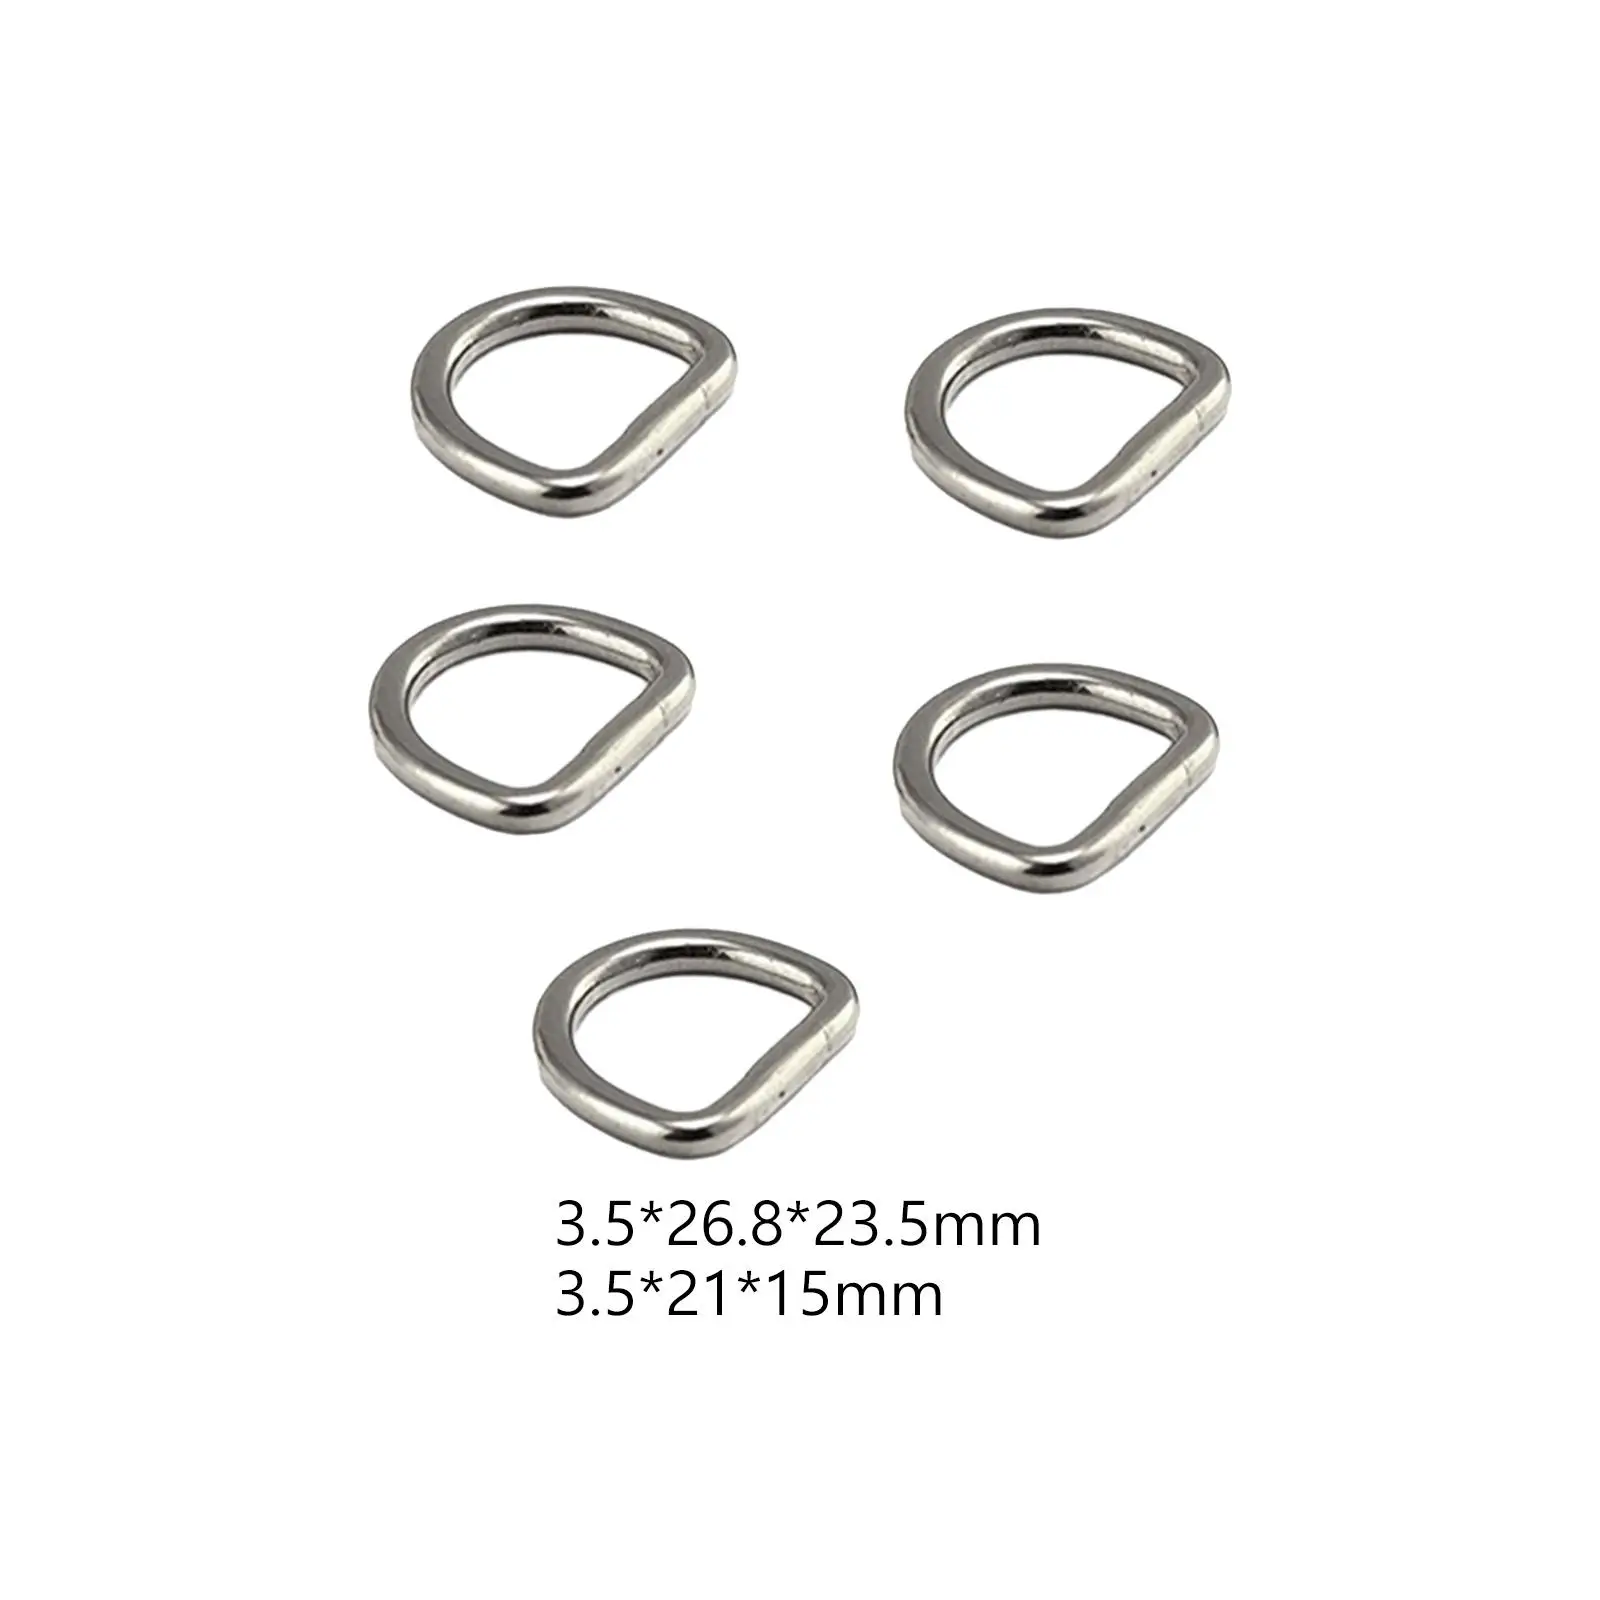 5x Metal D Rings Replacement Heavy Duty Seamless Steel D Hook Buckle for Hammock Pets Collars Keychains Bag Straps Purses